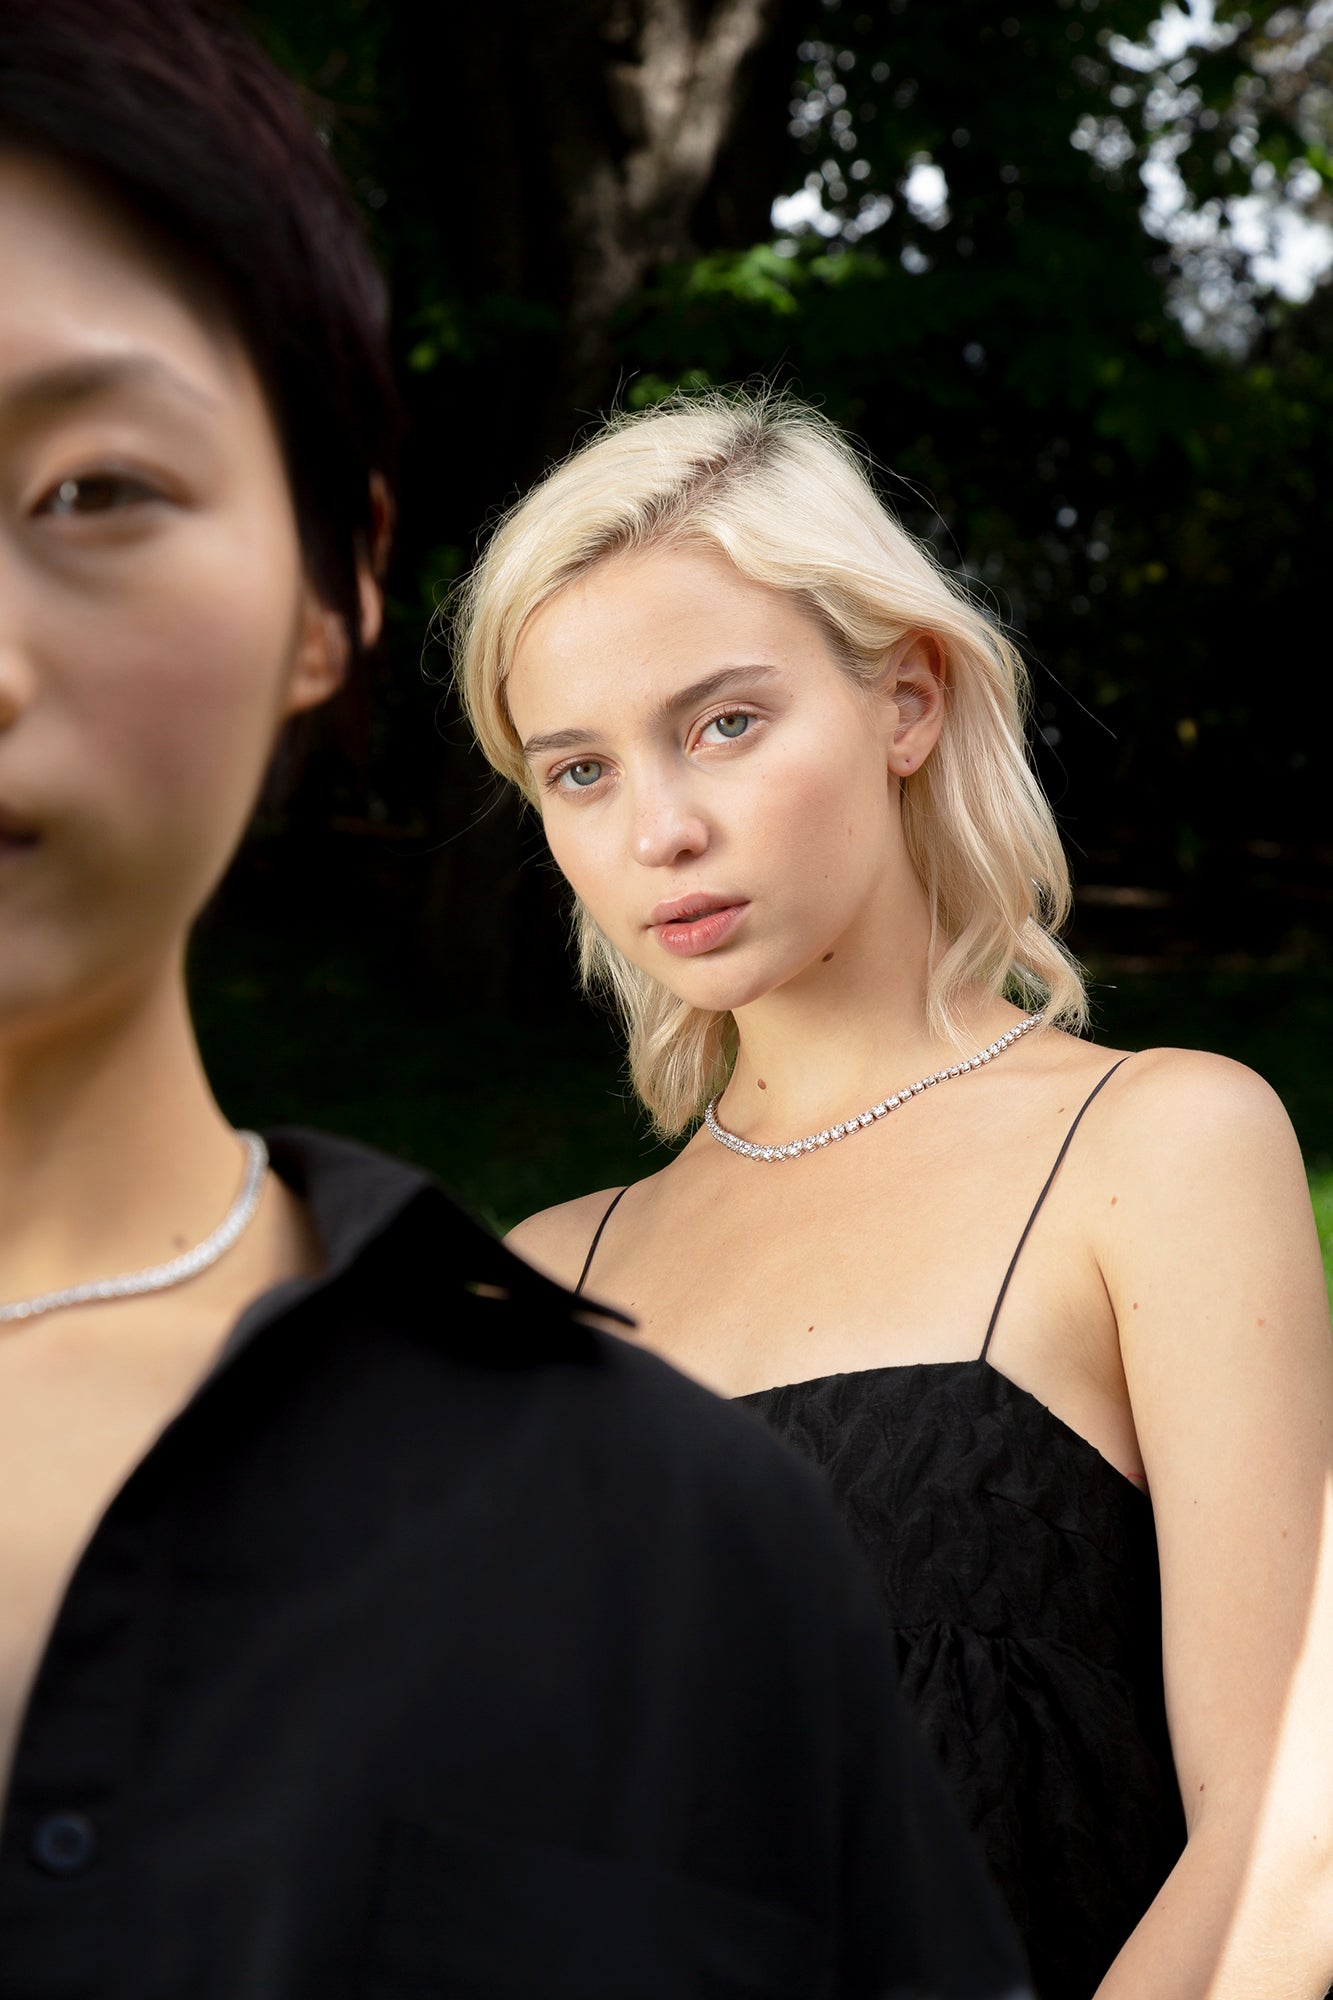 The Colliers - Or & Elle's tennis necklaces are exquisitely made with D color, IF/VVS clarity diamonds. Two models shown here are wearing the Collier Rivière and Collier de Diamants.